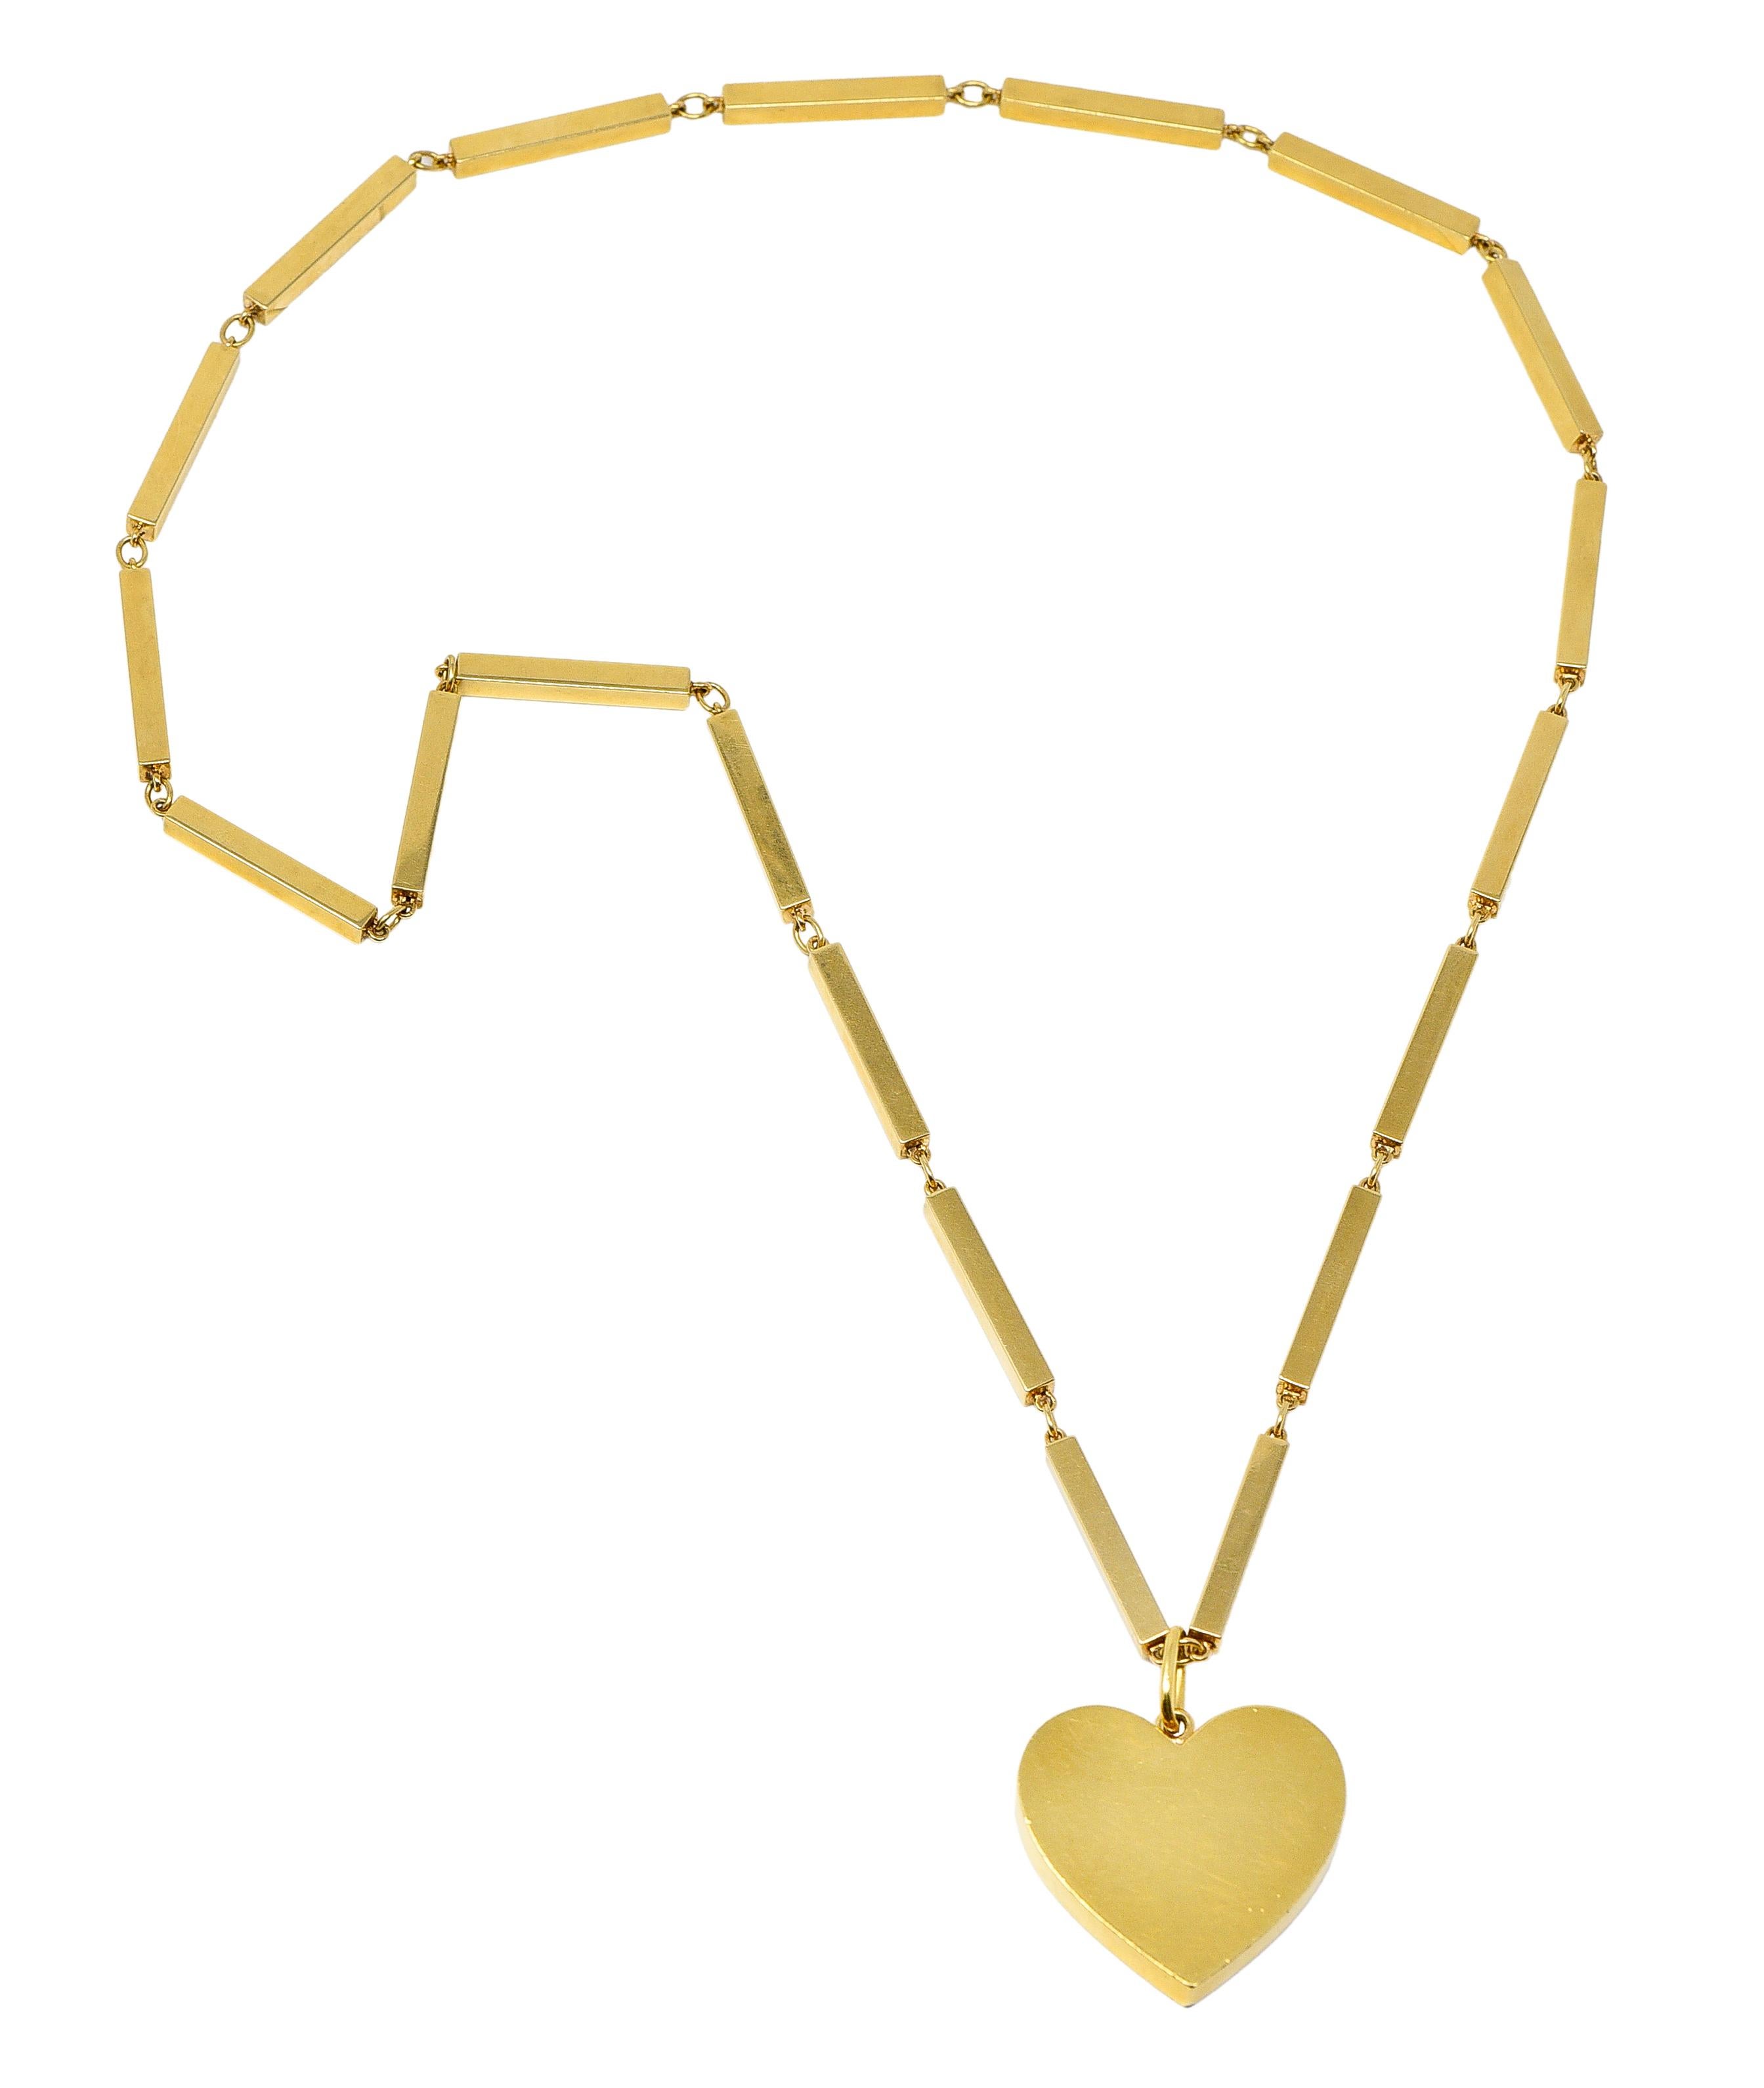 Comprised of a rectangular bar link chain suspending a large heart pendant. Heart is a dimensional flat faced form with a large bale. Featuring a high polish finish. Pendant is stamped for 18 karat gold. Chain is stamped for 14 karat gold. Fully